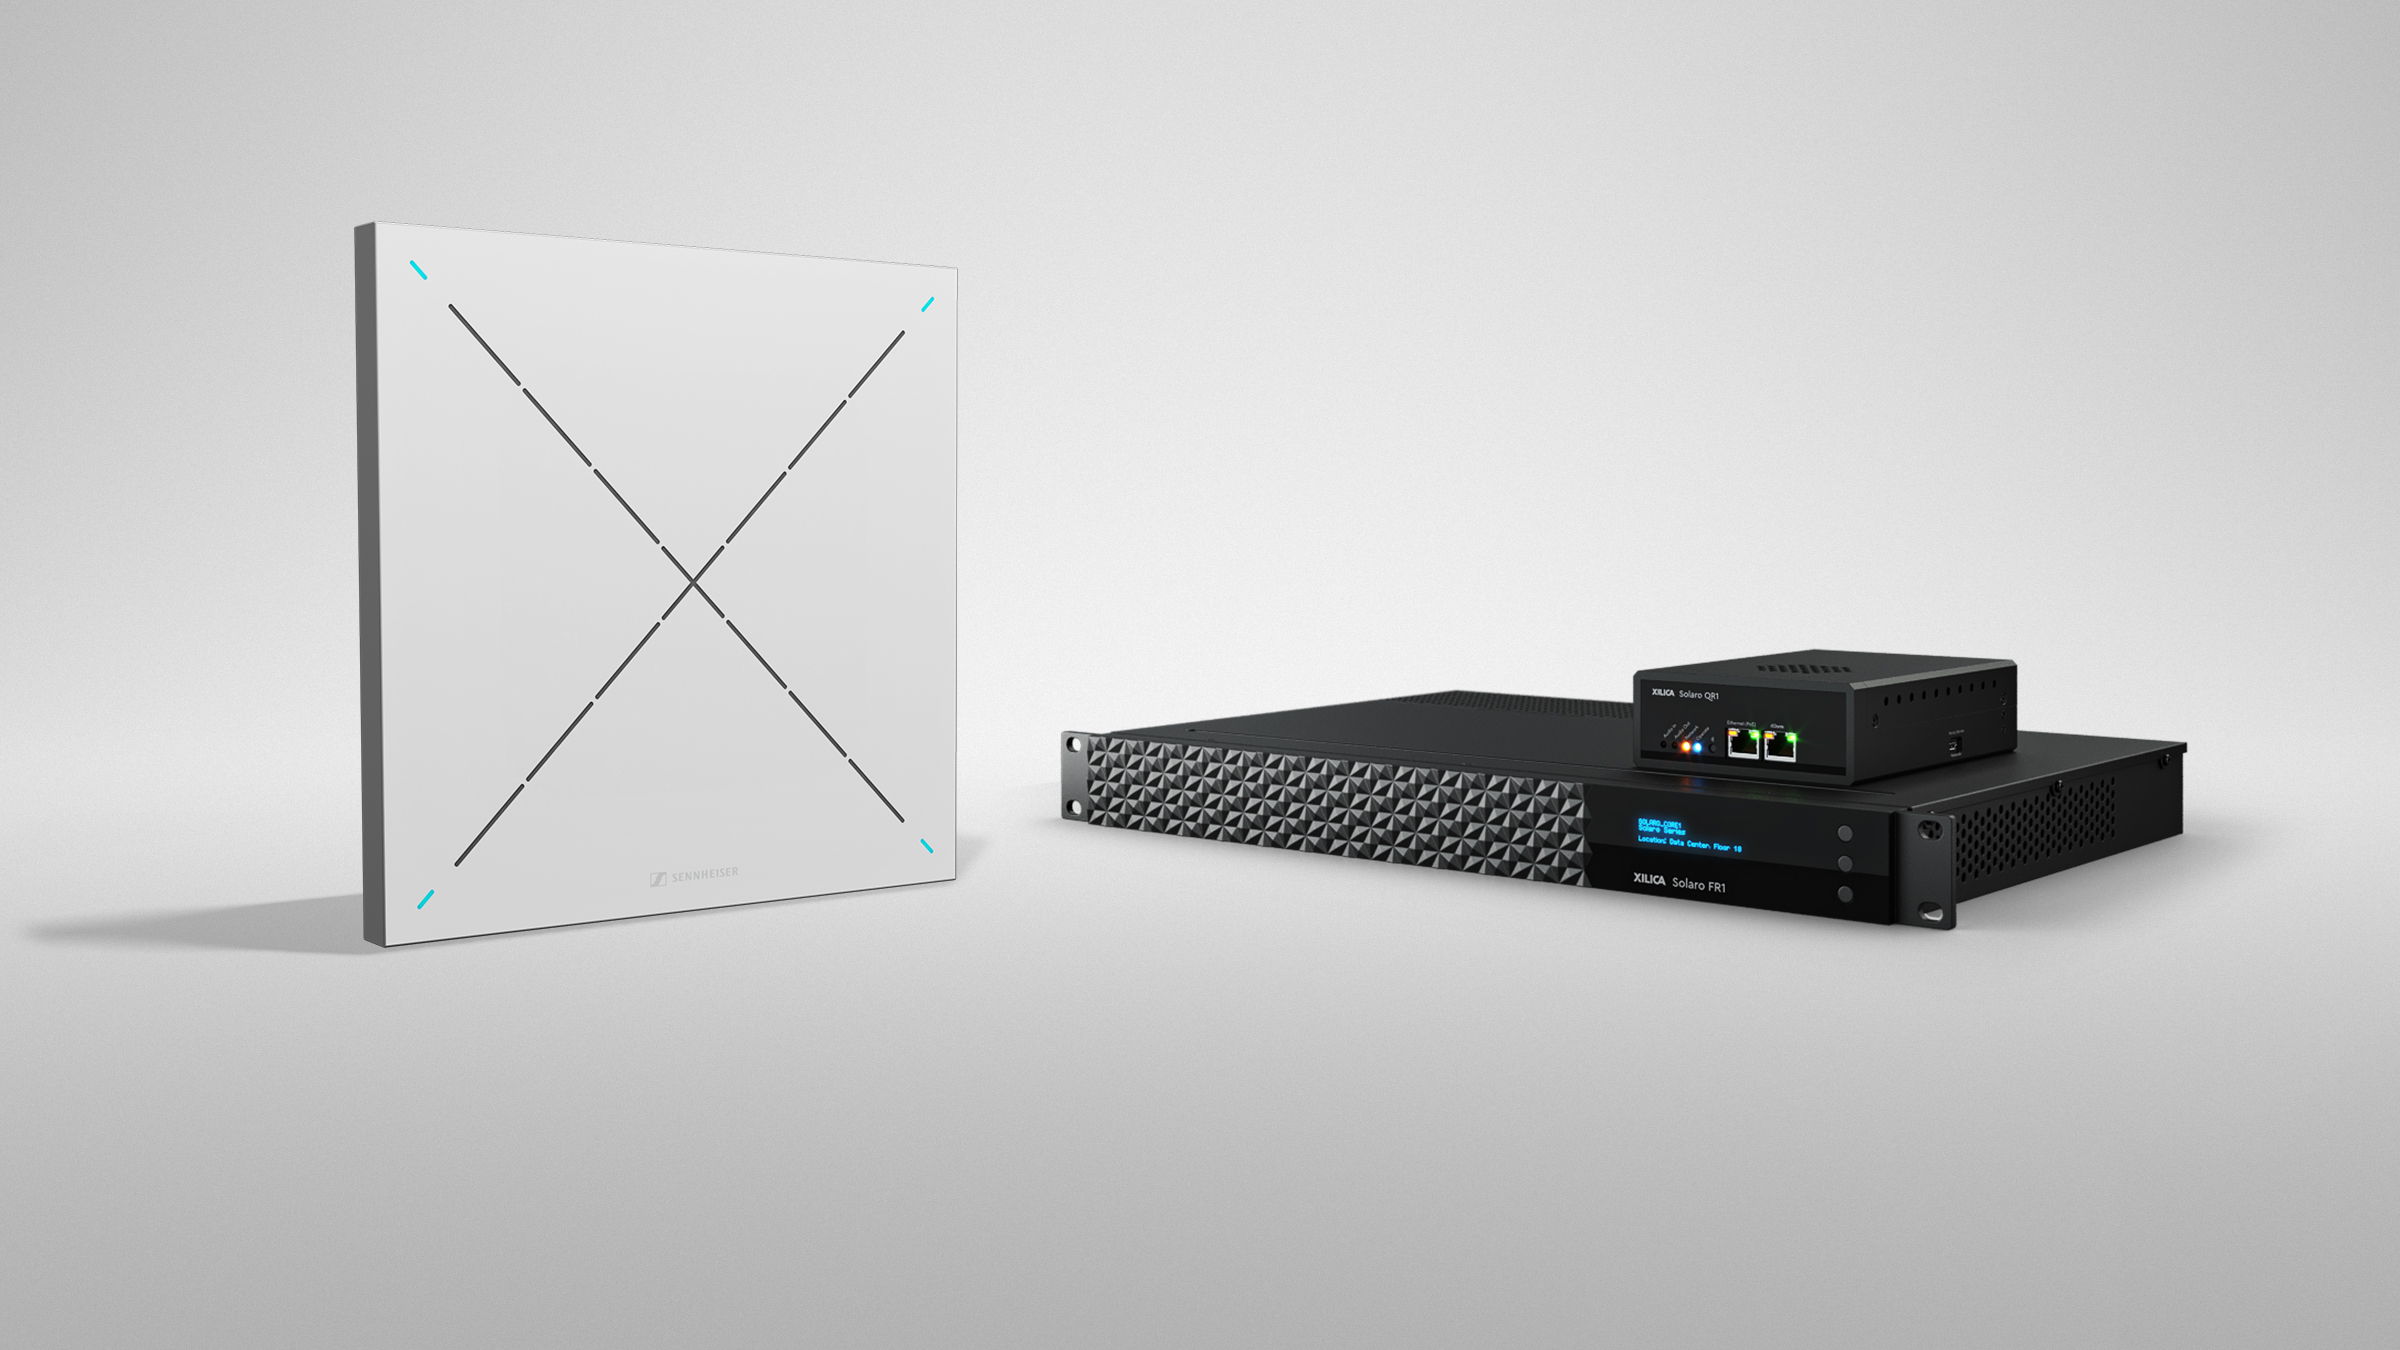 The Xilica-Sennheiser solution pairs the Sennheiser TeamConnect Ceiling 2 beamforming microphone array with Xilica’s ecosystem of DSP, user interfaces and network endpoints